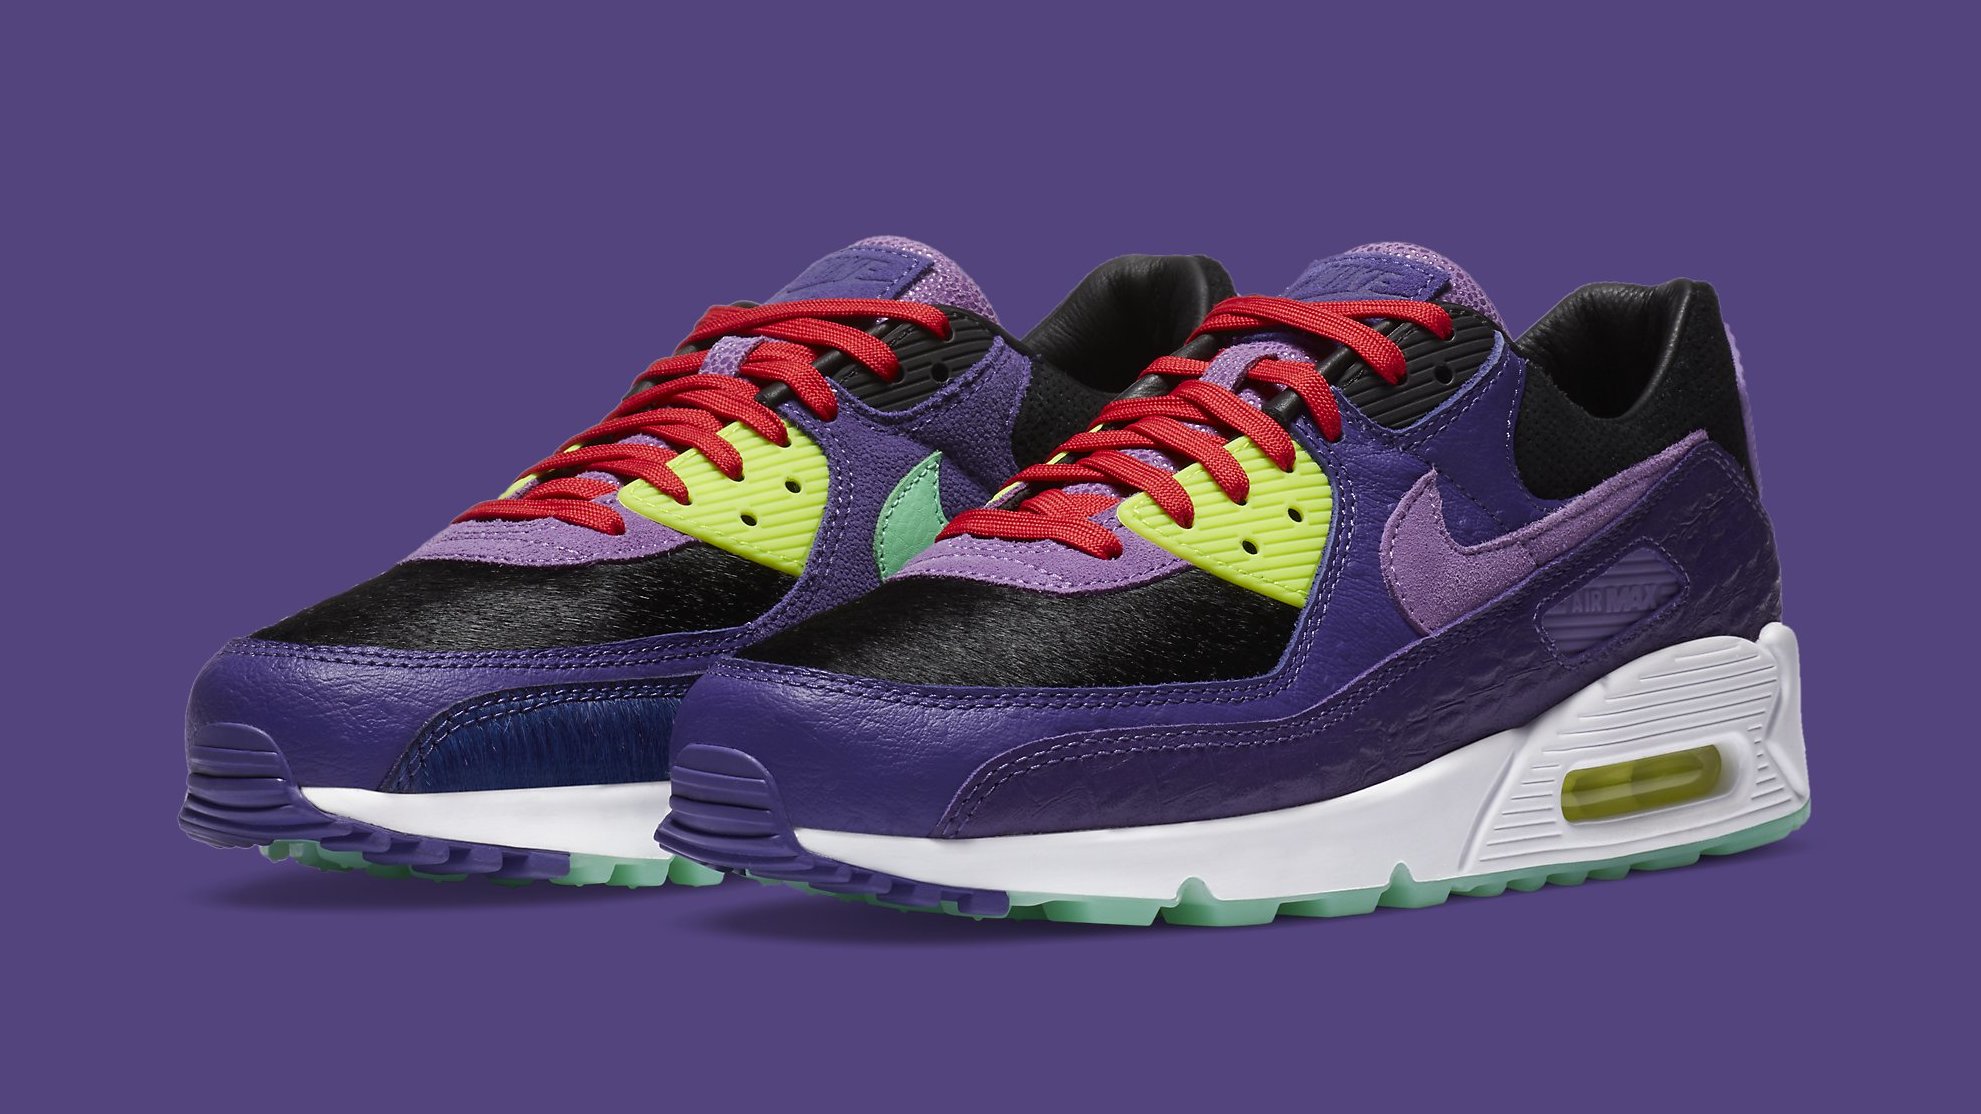 These New Air Max 90s Look Familiar | Complex